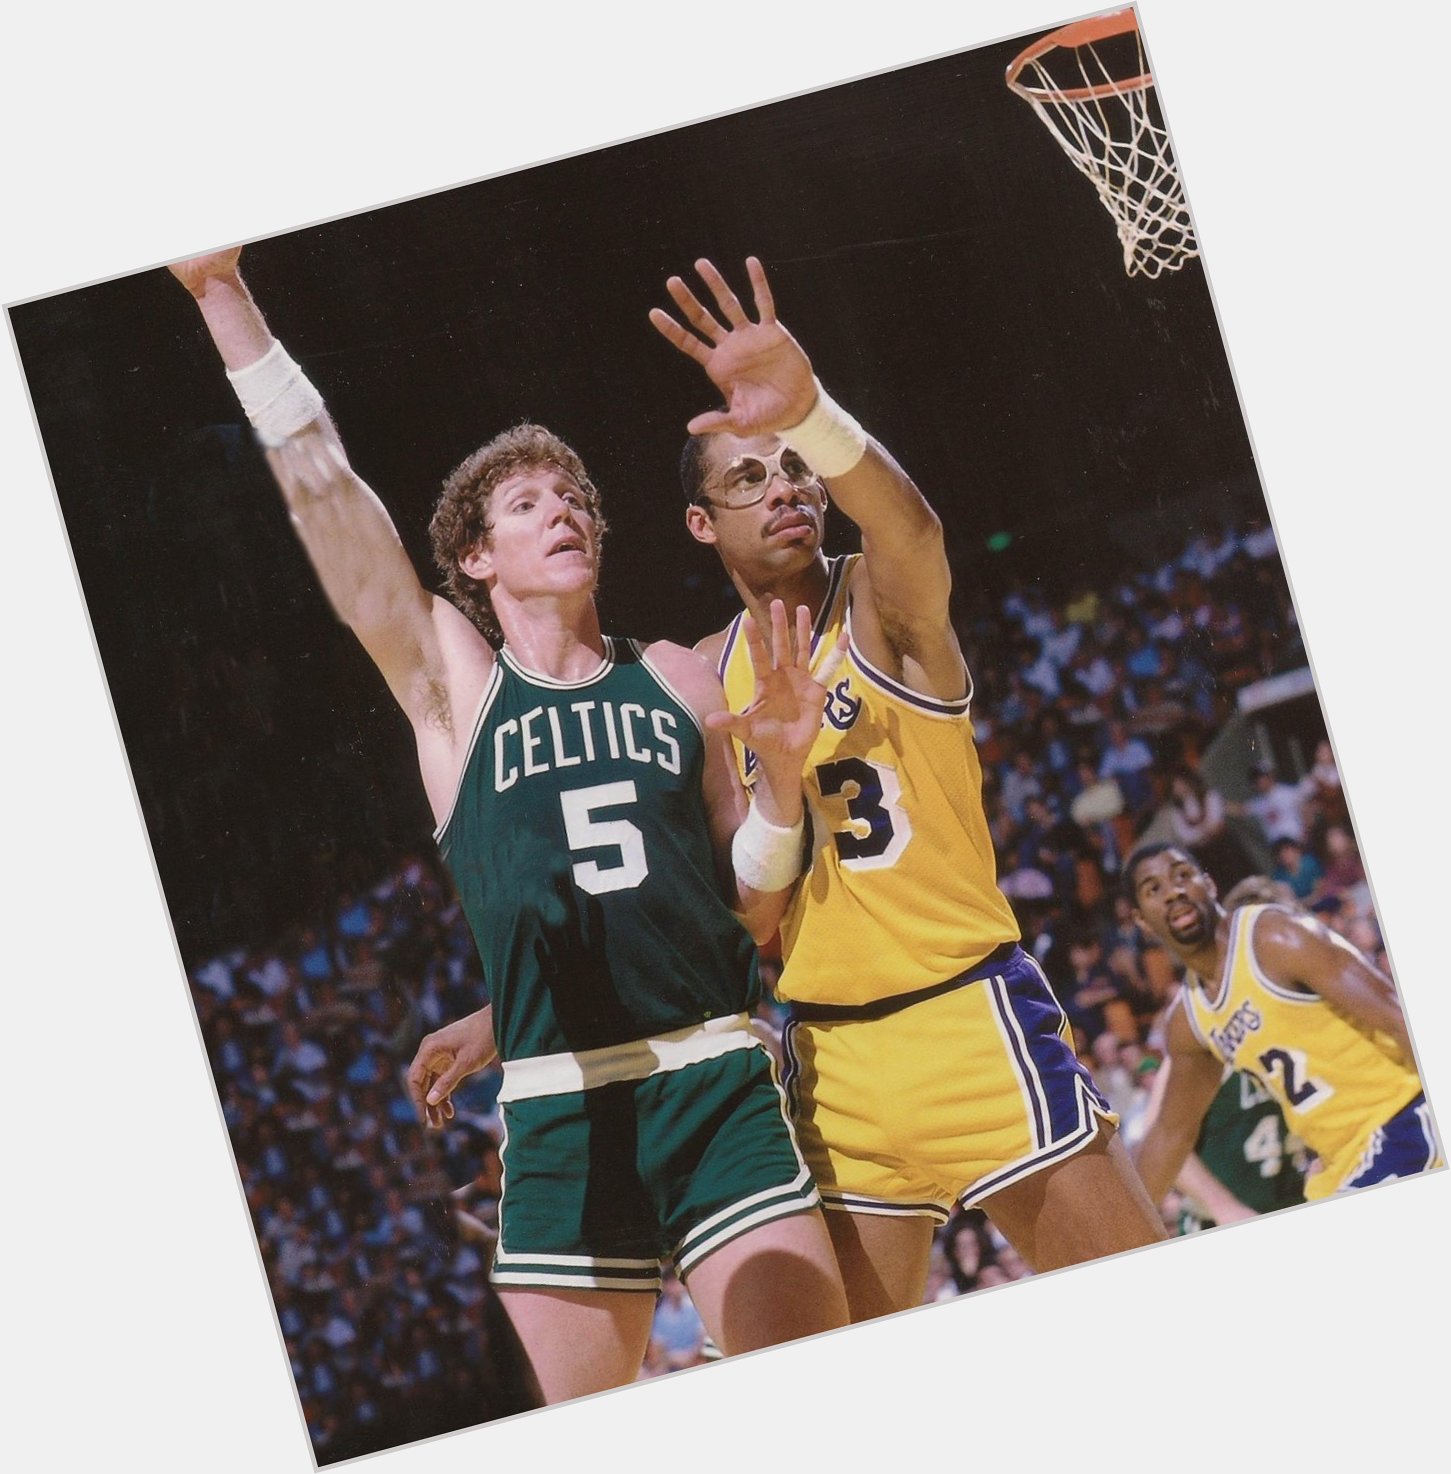 Happy 62nd birthday to Bill Walton. Even though hes from California, the Celtics was always his team. 